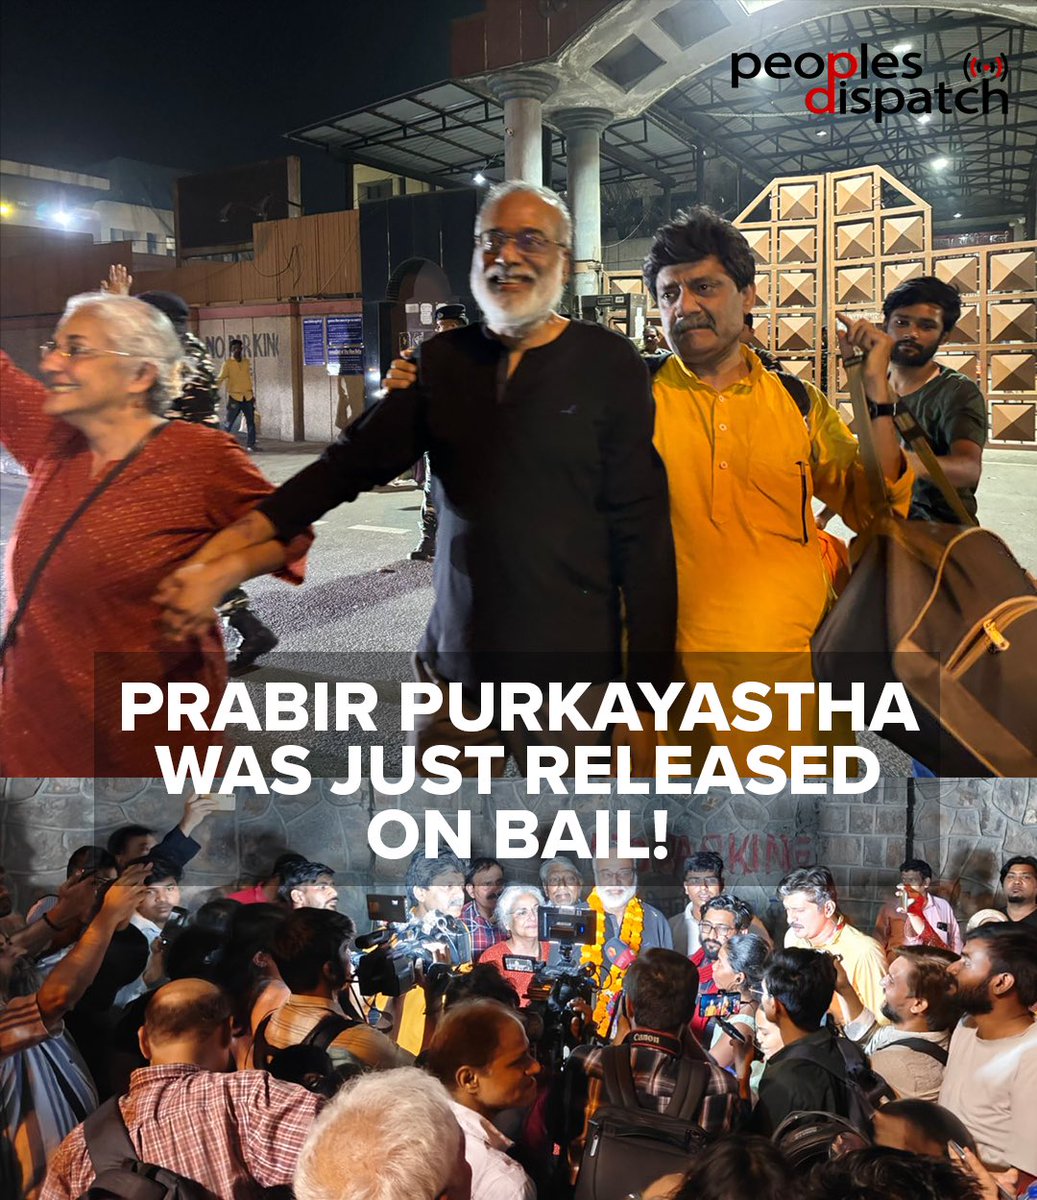 PRABIR PURKAYASTHA, FOUNDER OF NEWSCLICK, IS FREE!! The founder of @newsclickin Prabir Purkayastha was just freed after the Supreme Court ruled that his arrest was illegal and granted him bail.